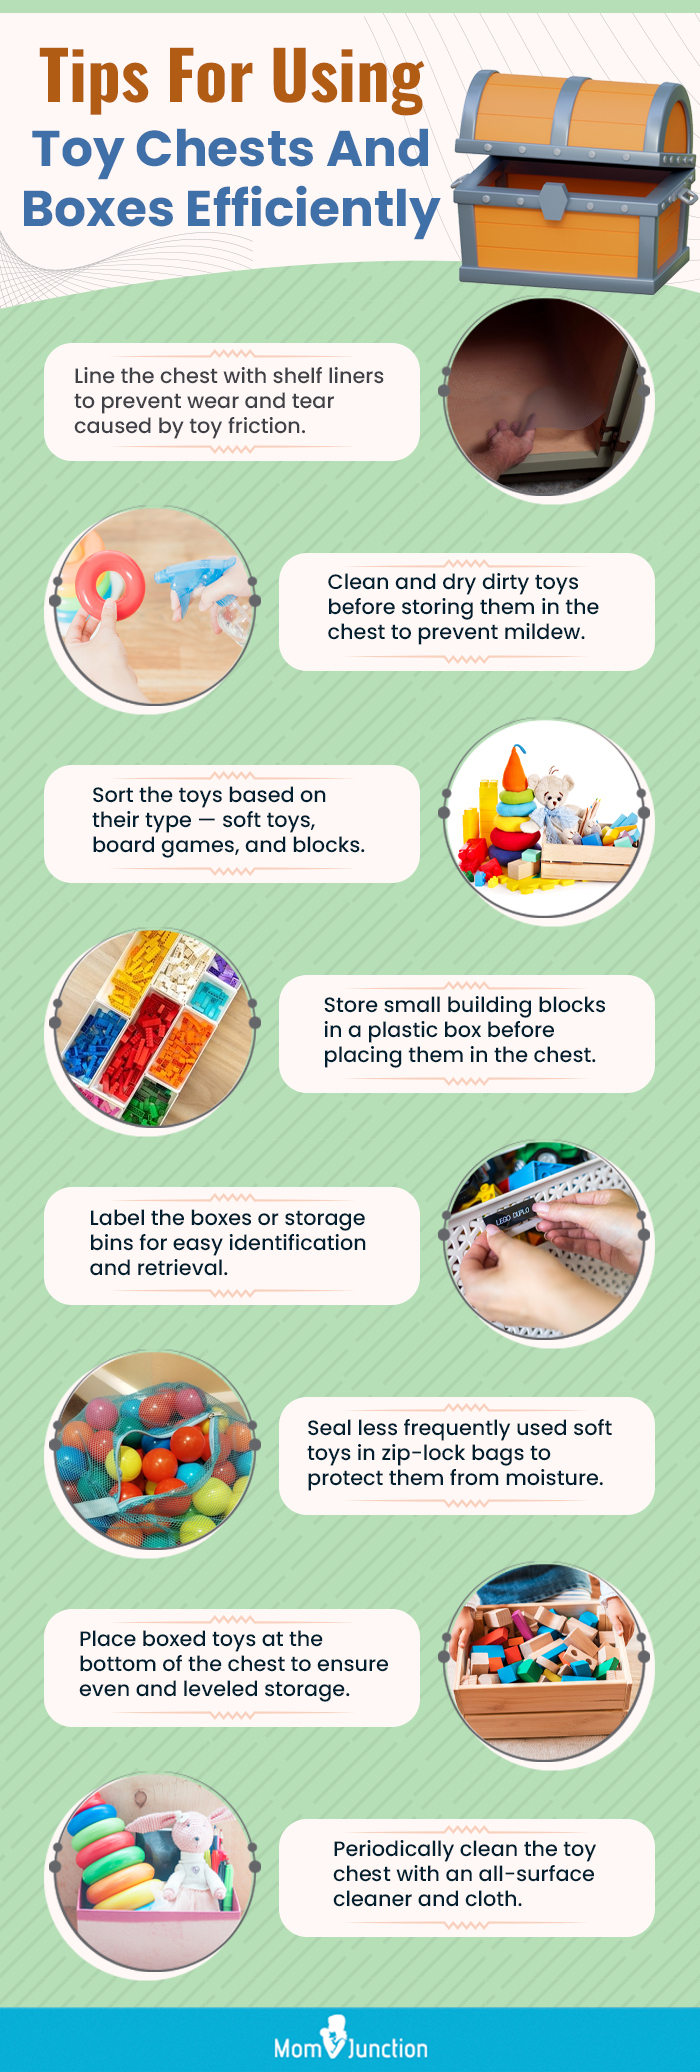 Tips For Using Toy Chests And Boxes Efficiently (infographic)